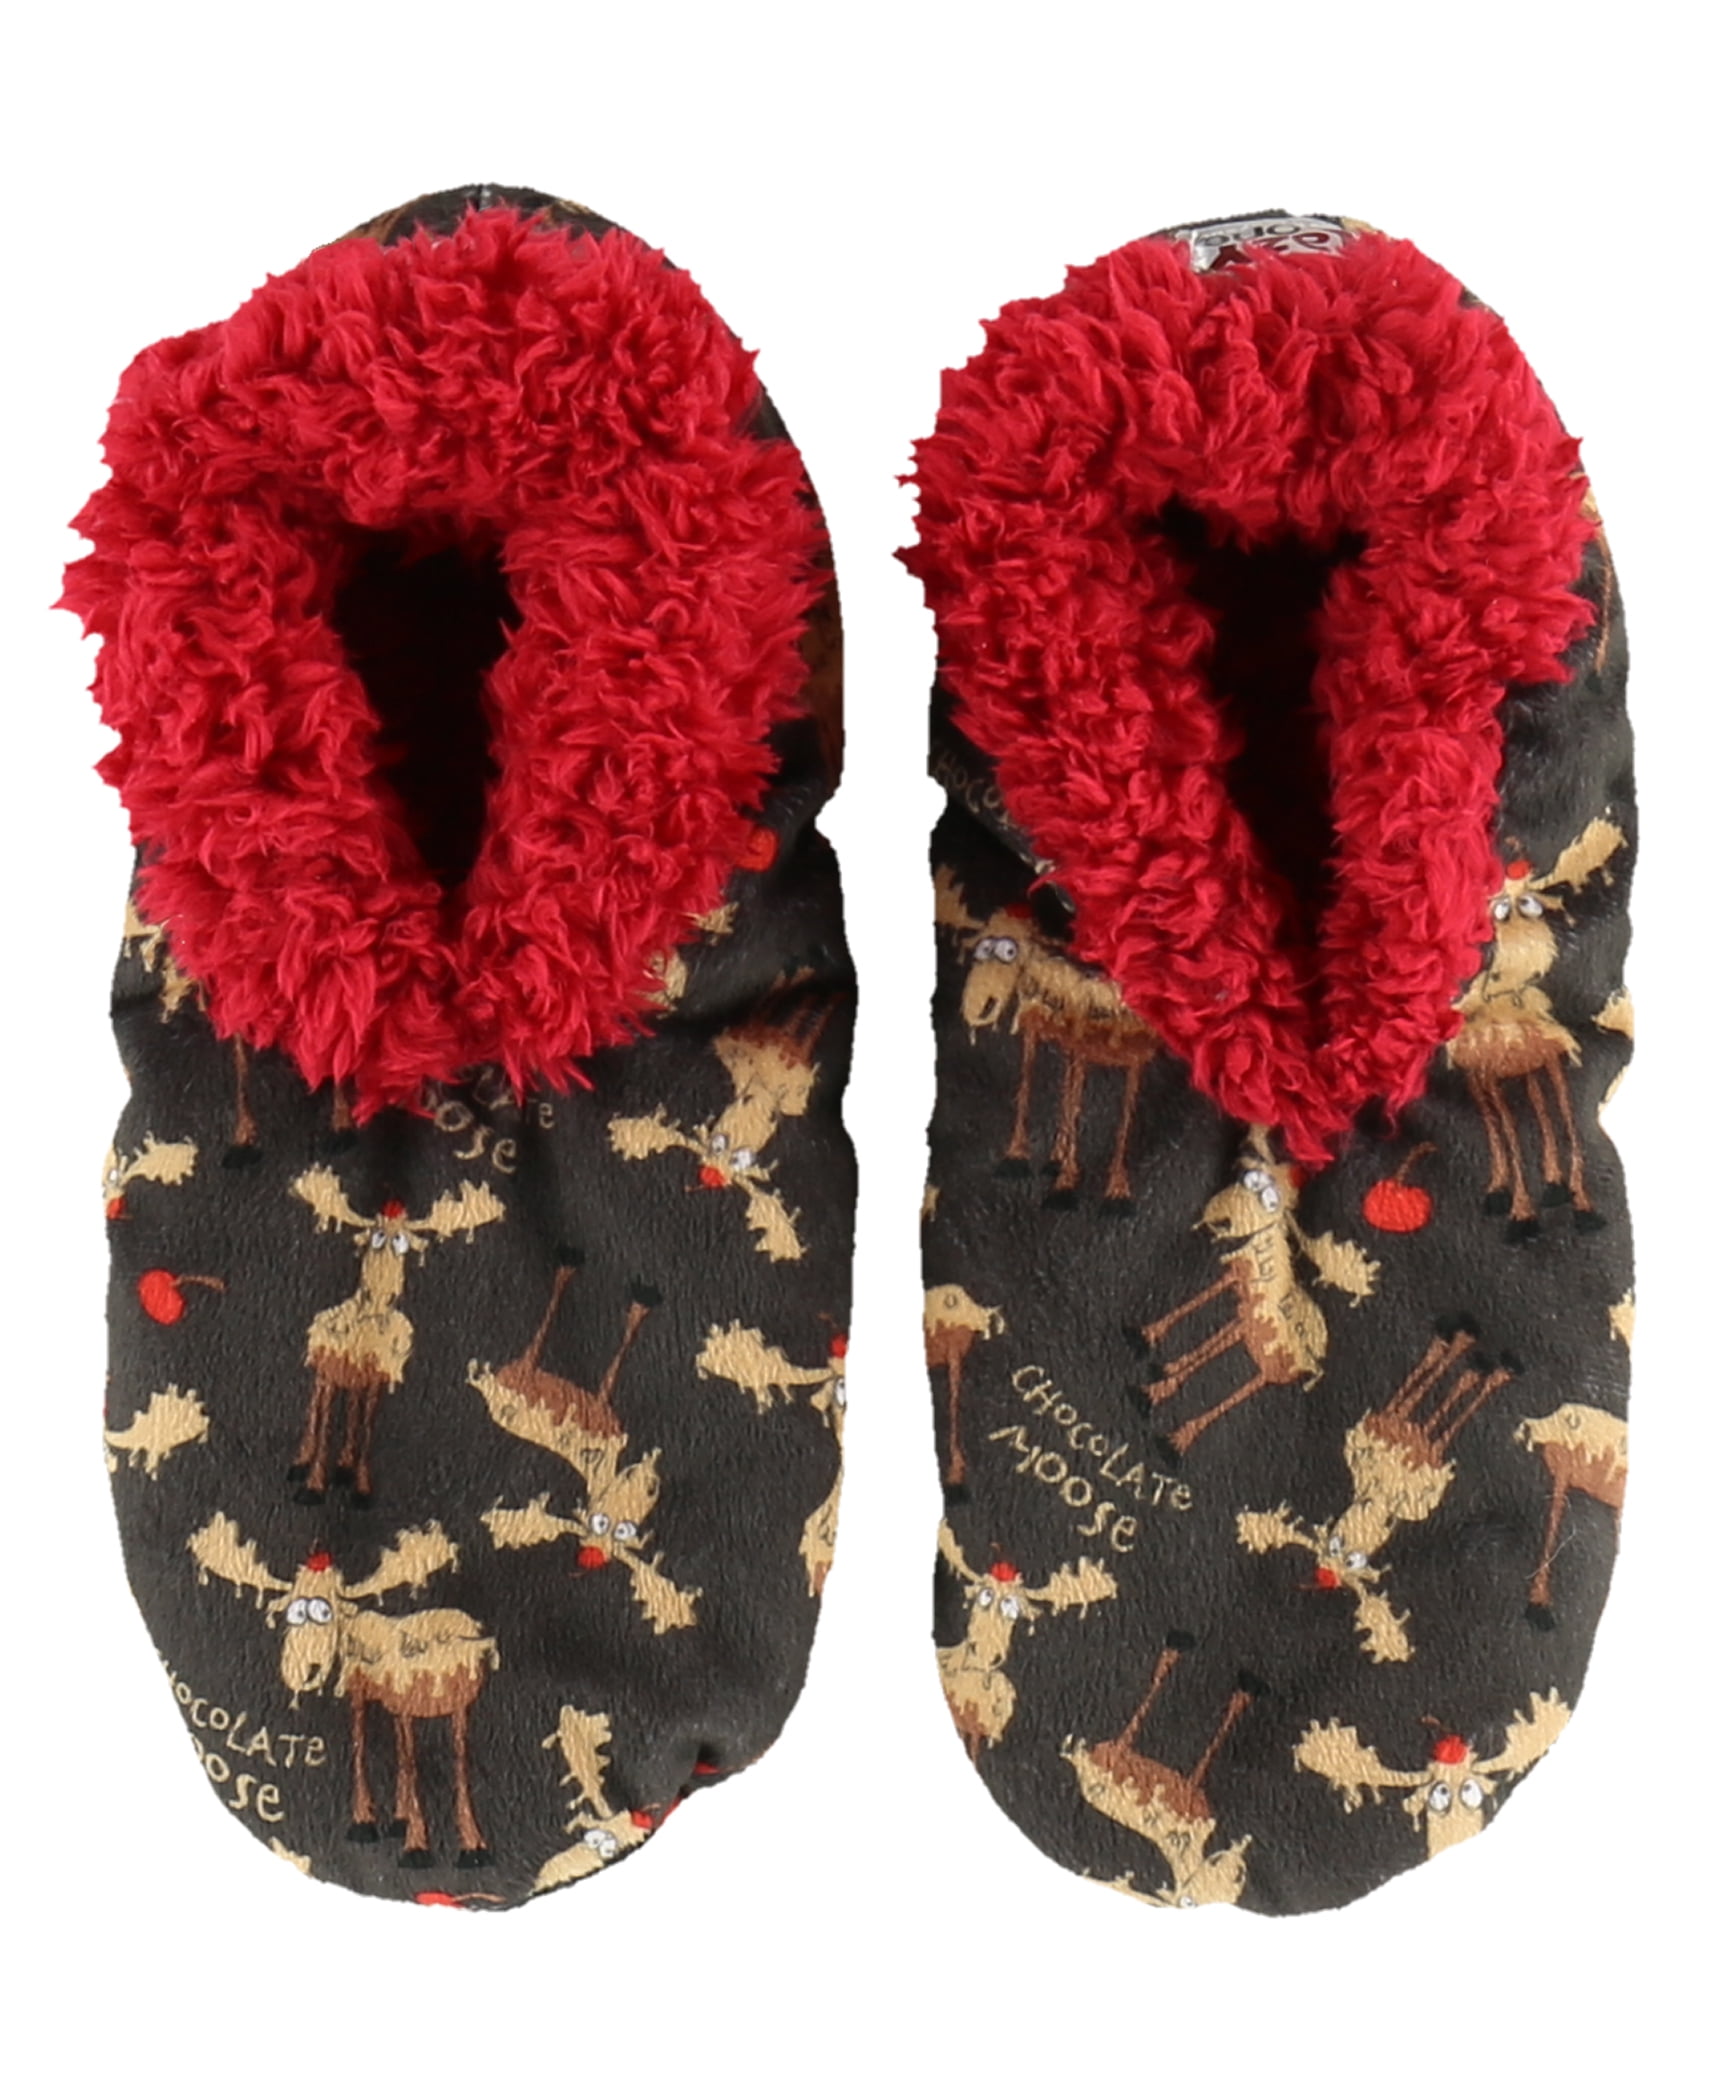 SO COMFY!!!! 4/6 LazyOne Fuzzy Feet Classic Red Moose Slippers Size S/M 